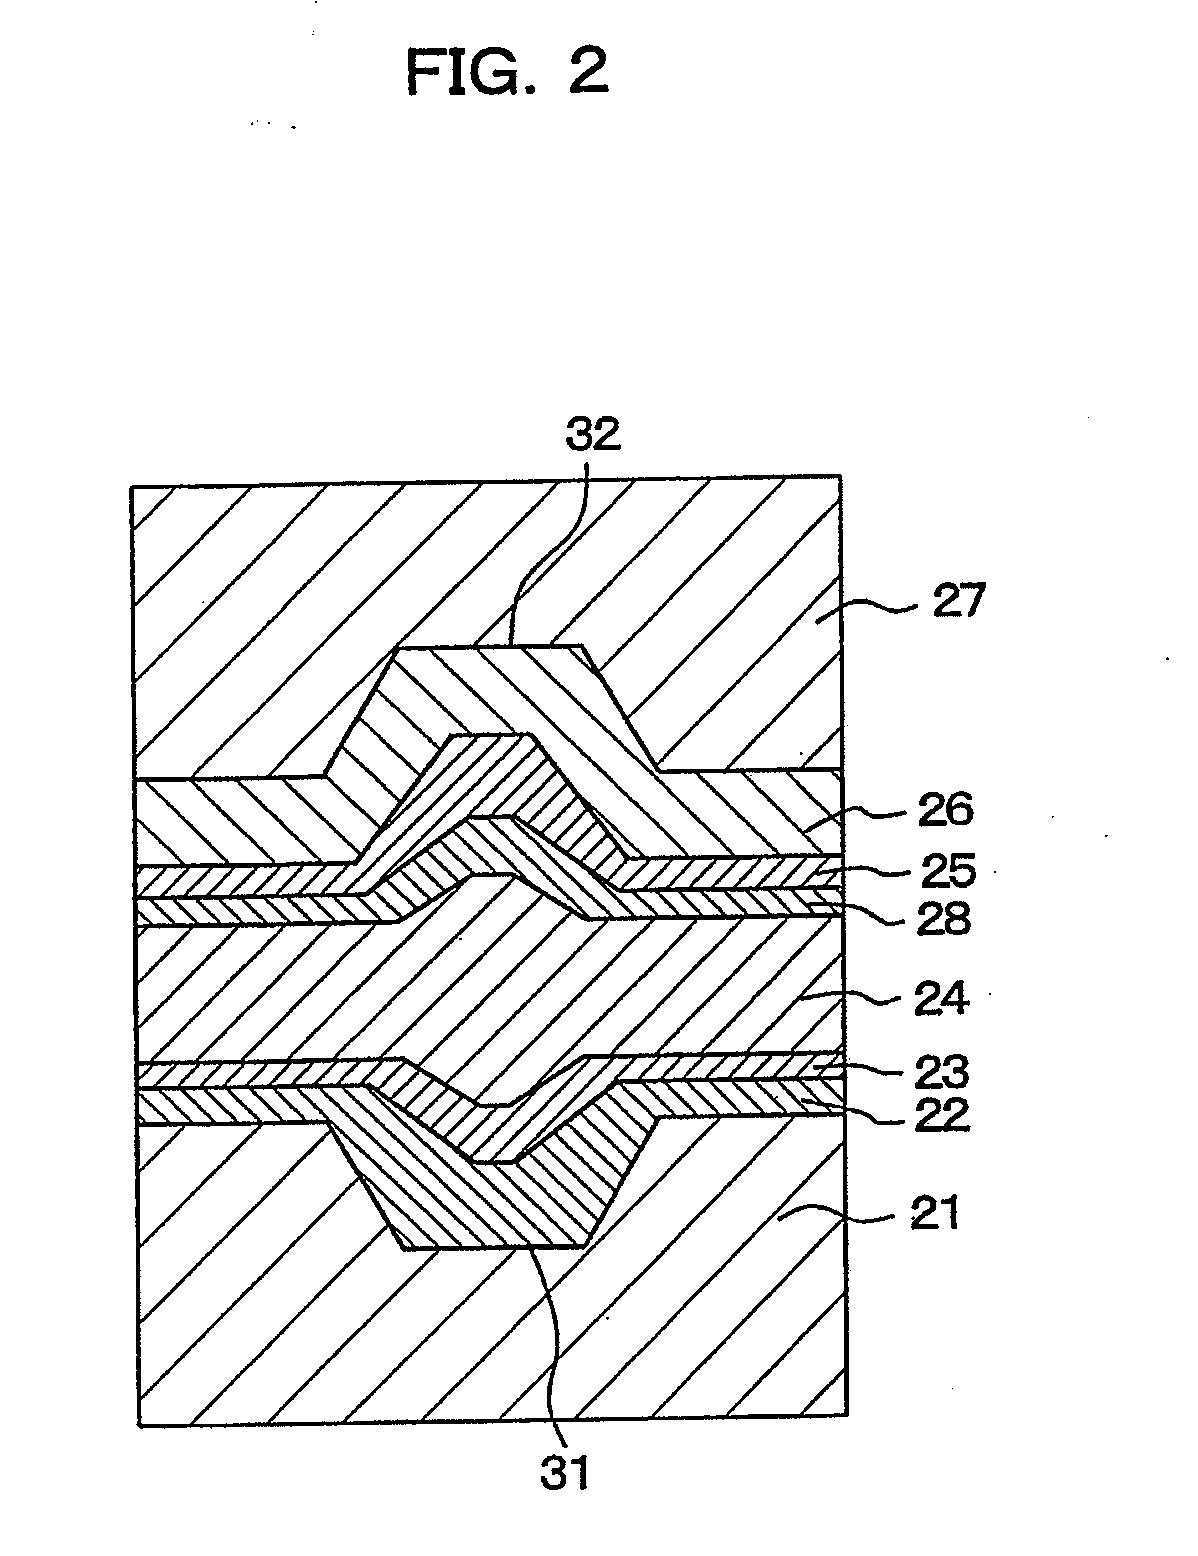 Recording/reading method for an optical recording medium using an irradiating a laser beam